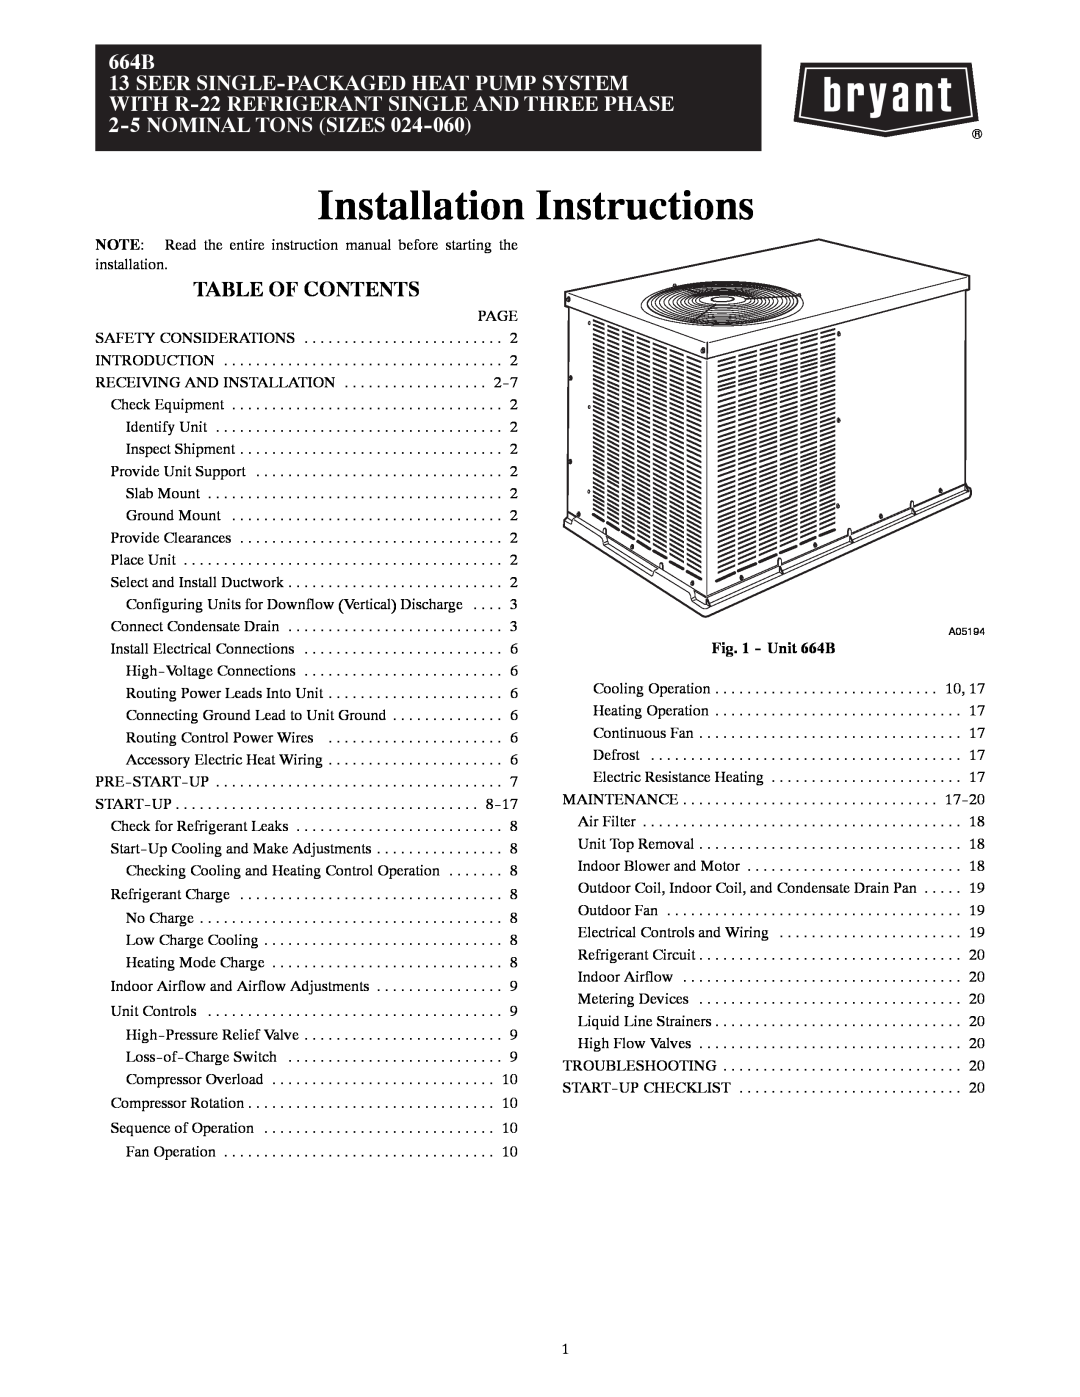 Bryant installation instructions Table Of Contents, Unit 664B, Installation Instructions 